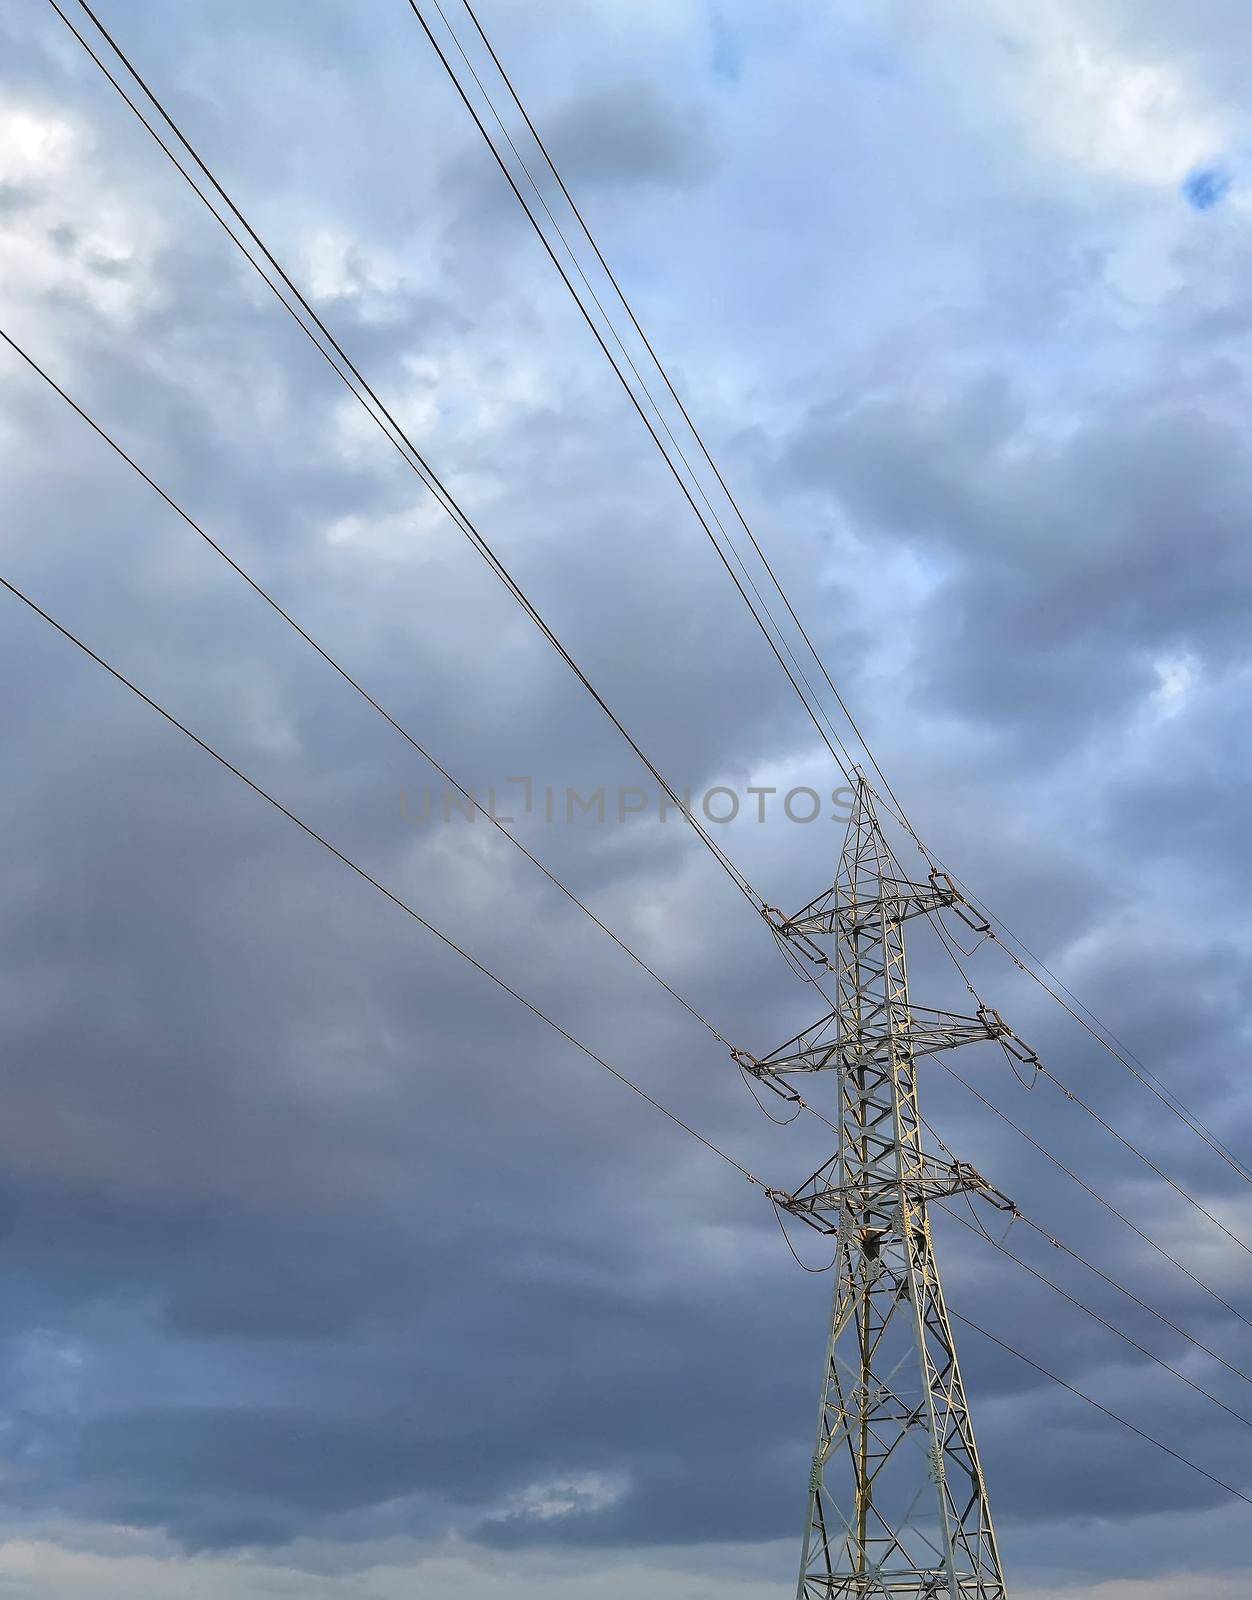 High voltage electric pole and transmission lines. Electricity pylons. Power and energy engineering system.  by EdVal